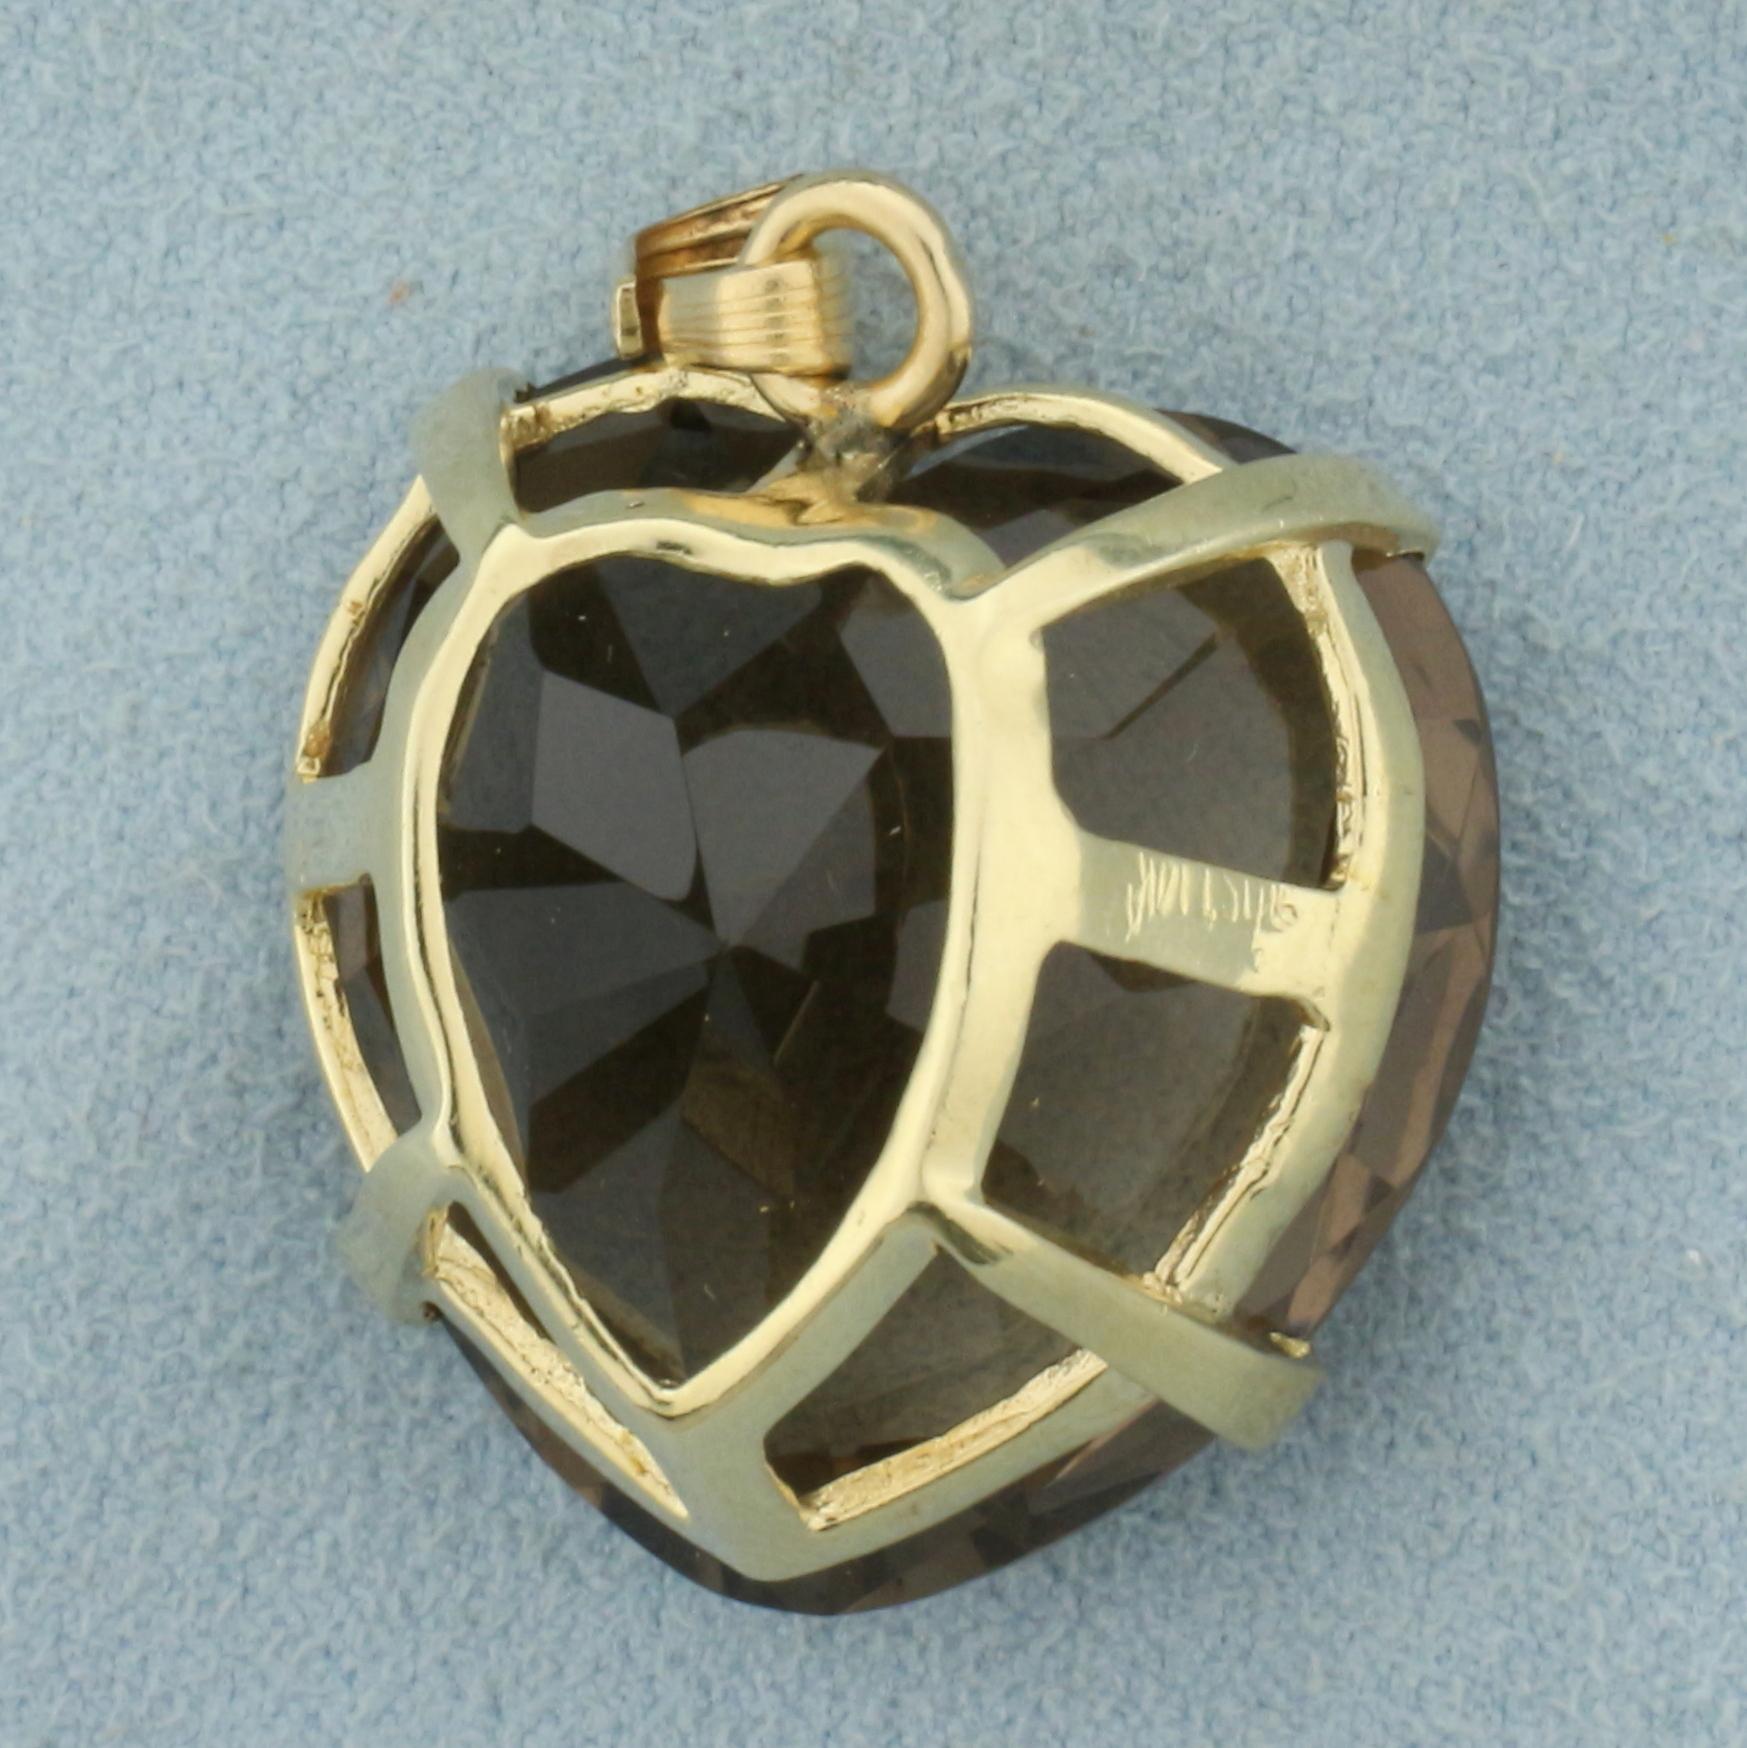 Large 55ct Smoky Topaz Heart Shaped Pendant In 14k Yellow Gold